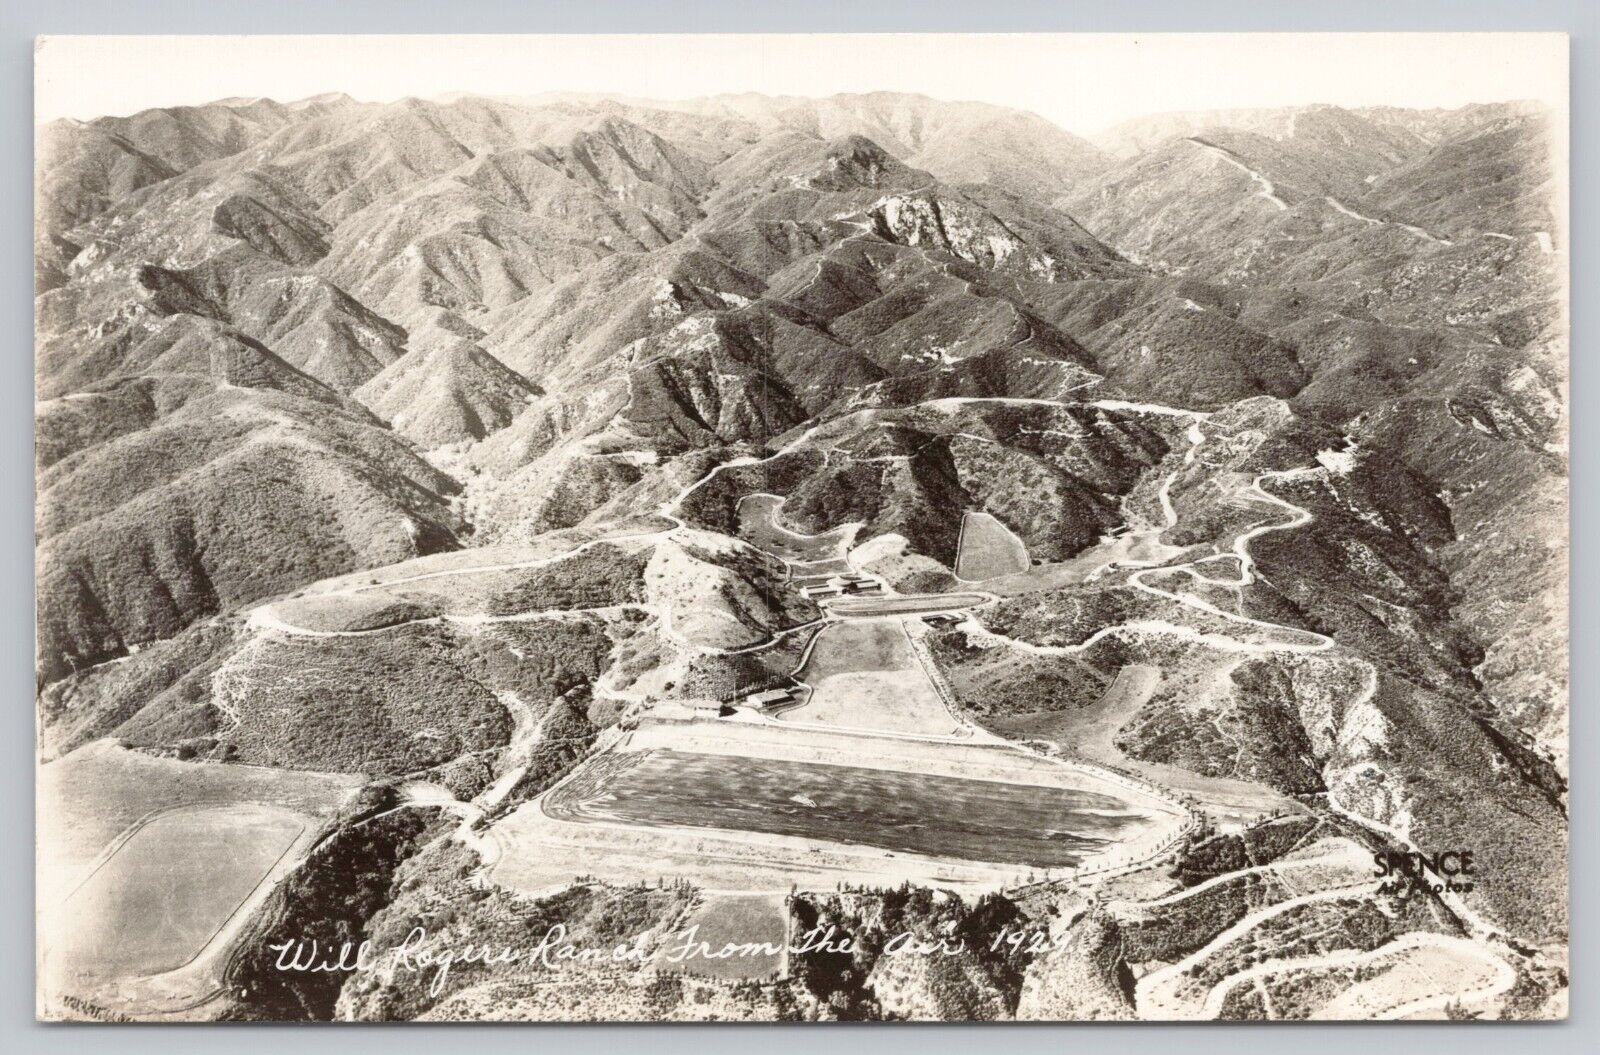 Rustic Canyon CA, Will Rogers Ranch Aerial View Vintage RPPC Real Photo Postcard